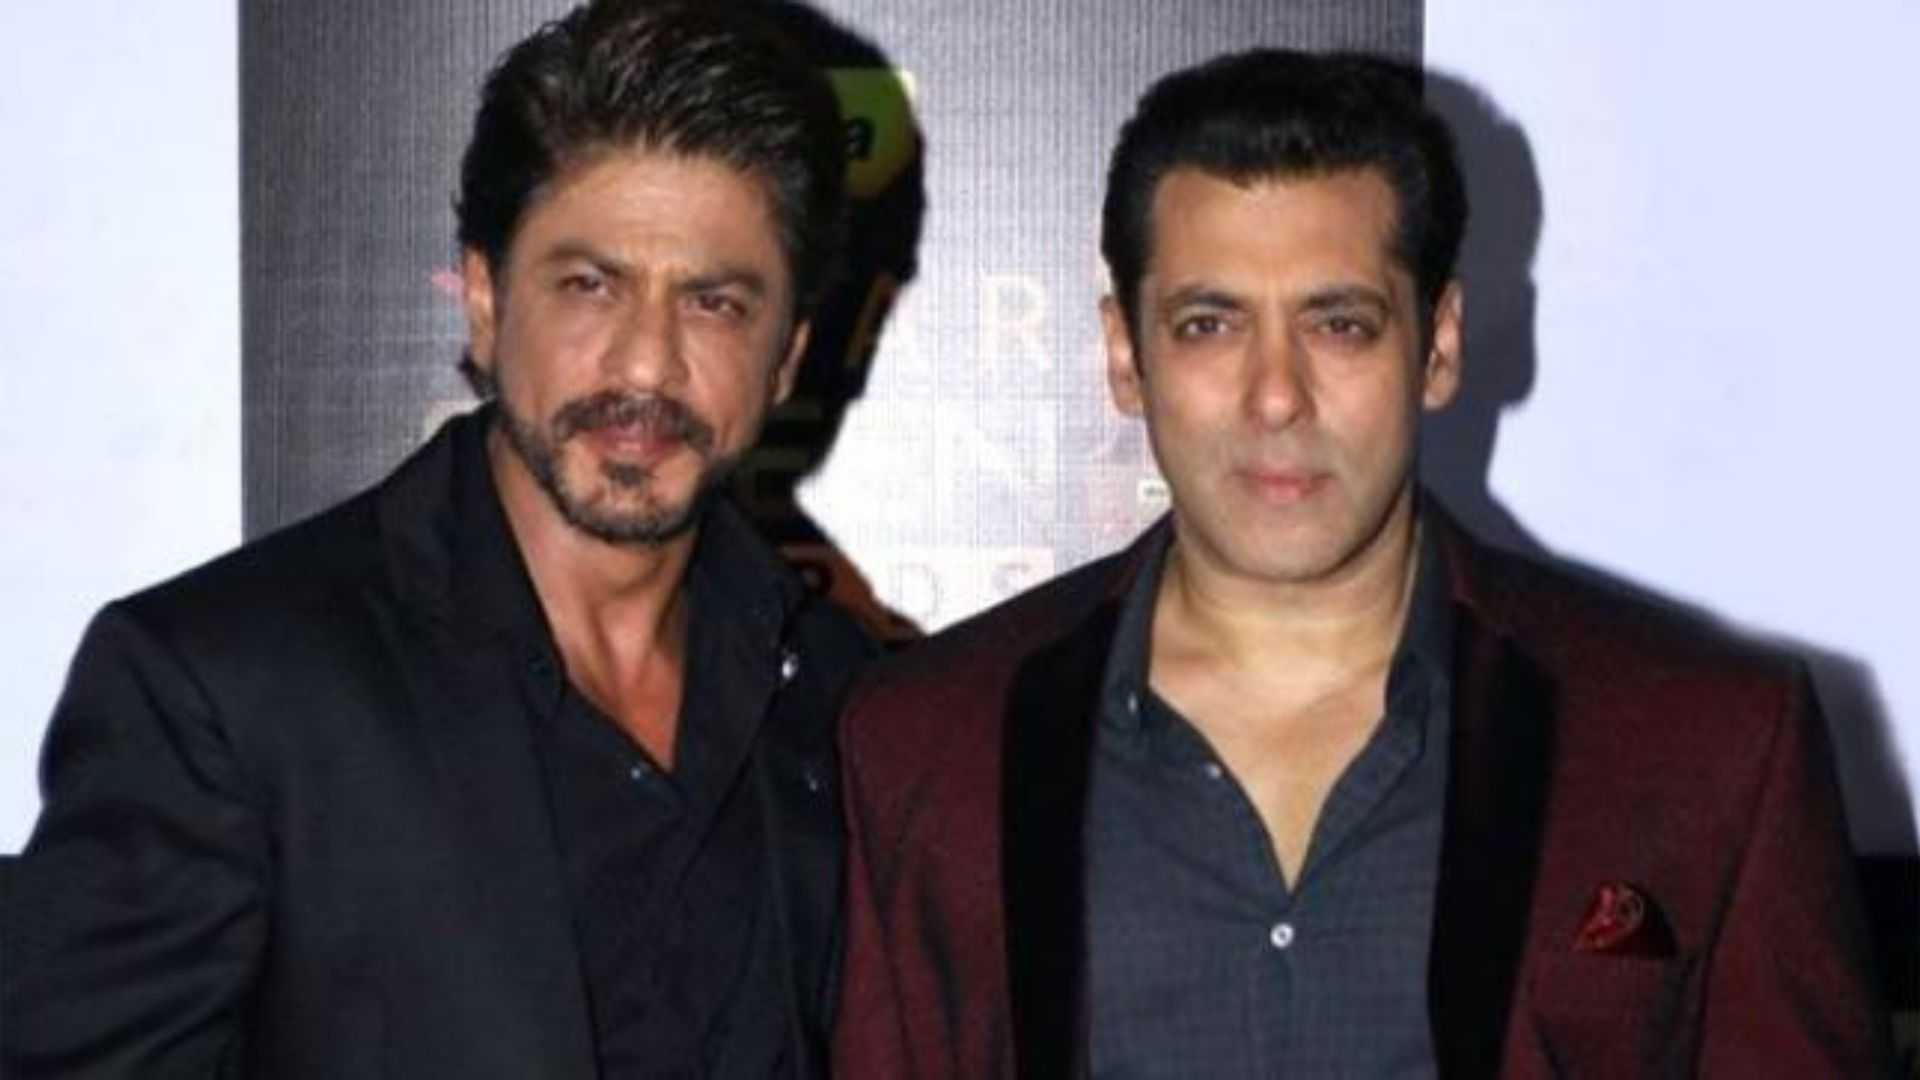 Shah Rukh Khan, Salman Khan starrer Tiger Vs Pathaan to be India's biggest film ever produced, shoot to commence in 2024